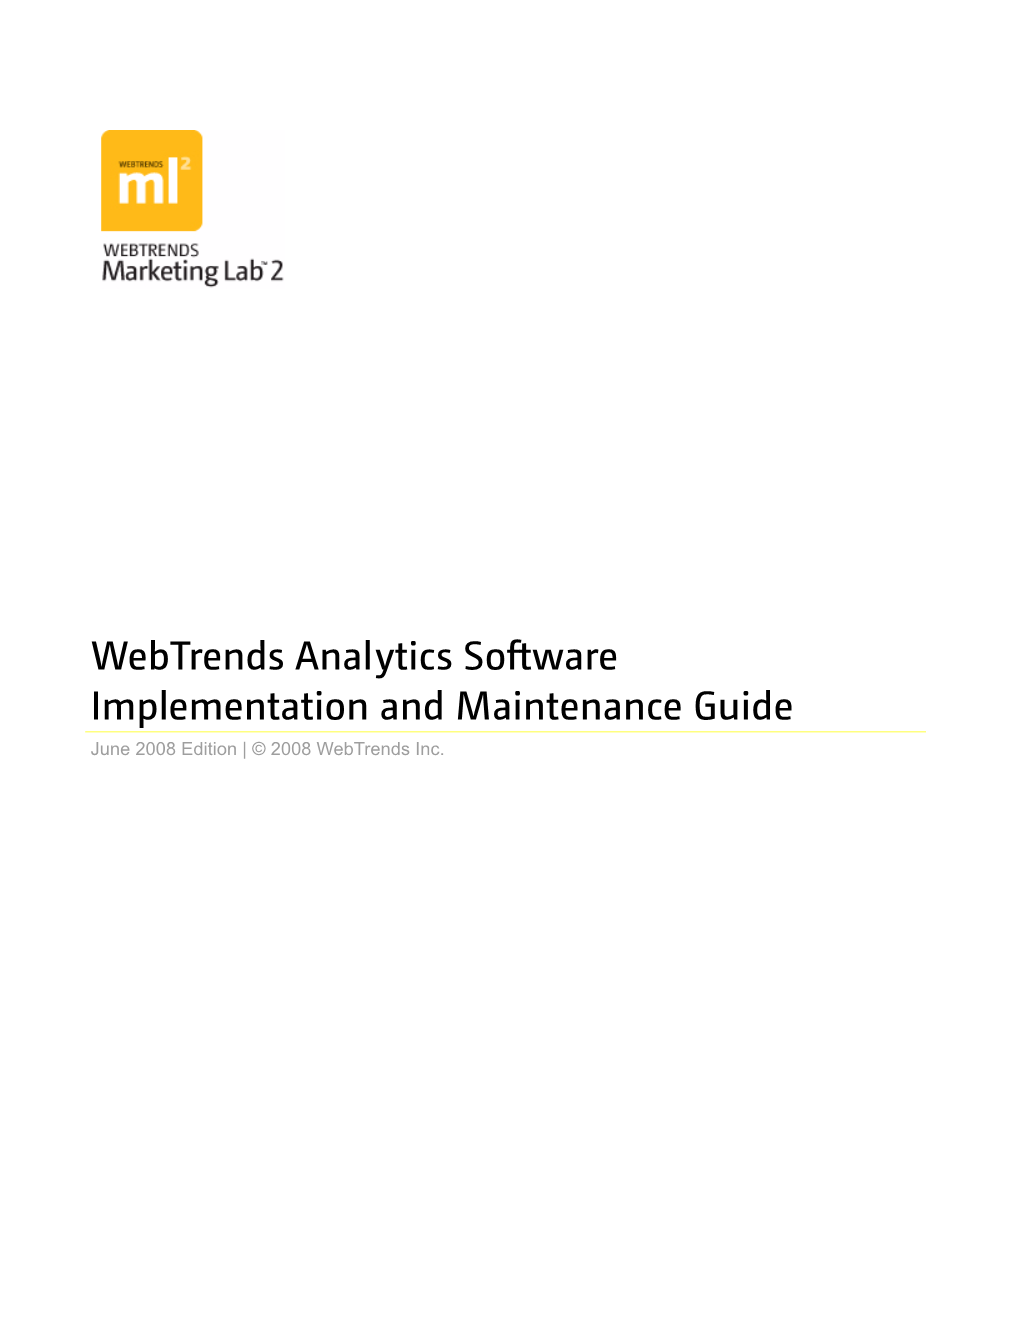 Webtrends Analytics Software Implementation and Maintenance Guide